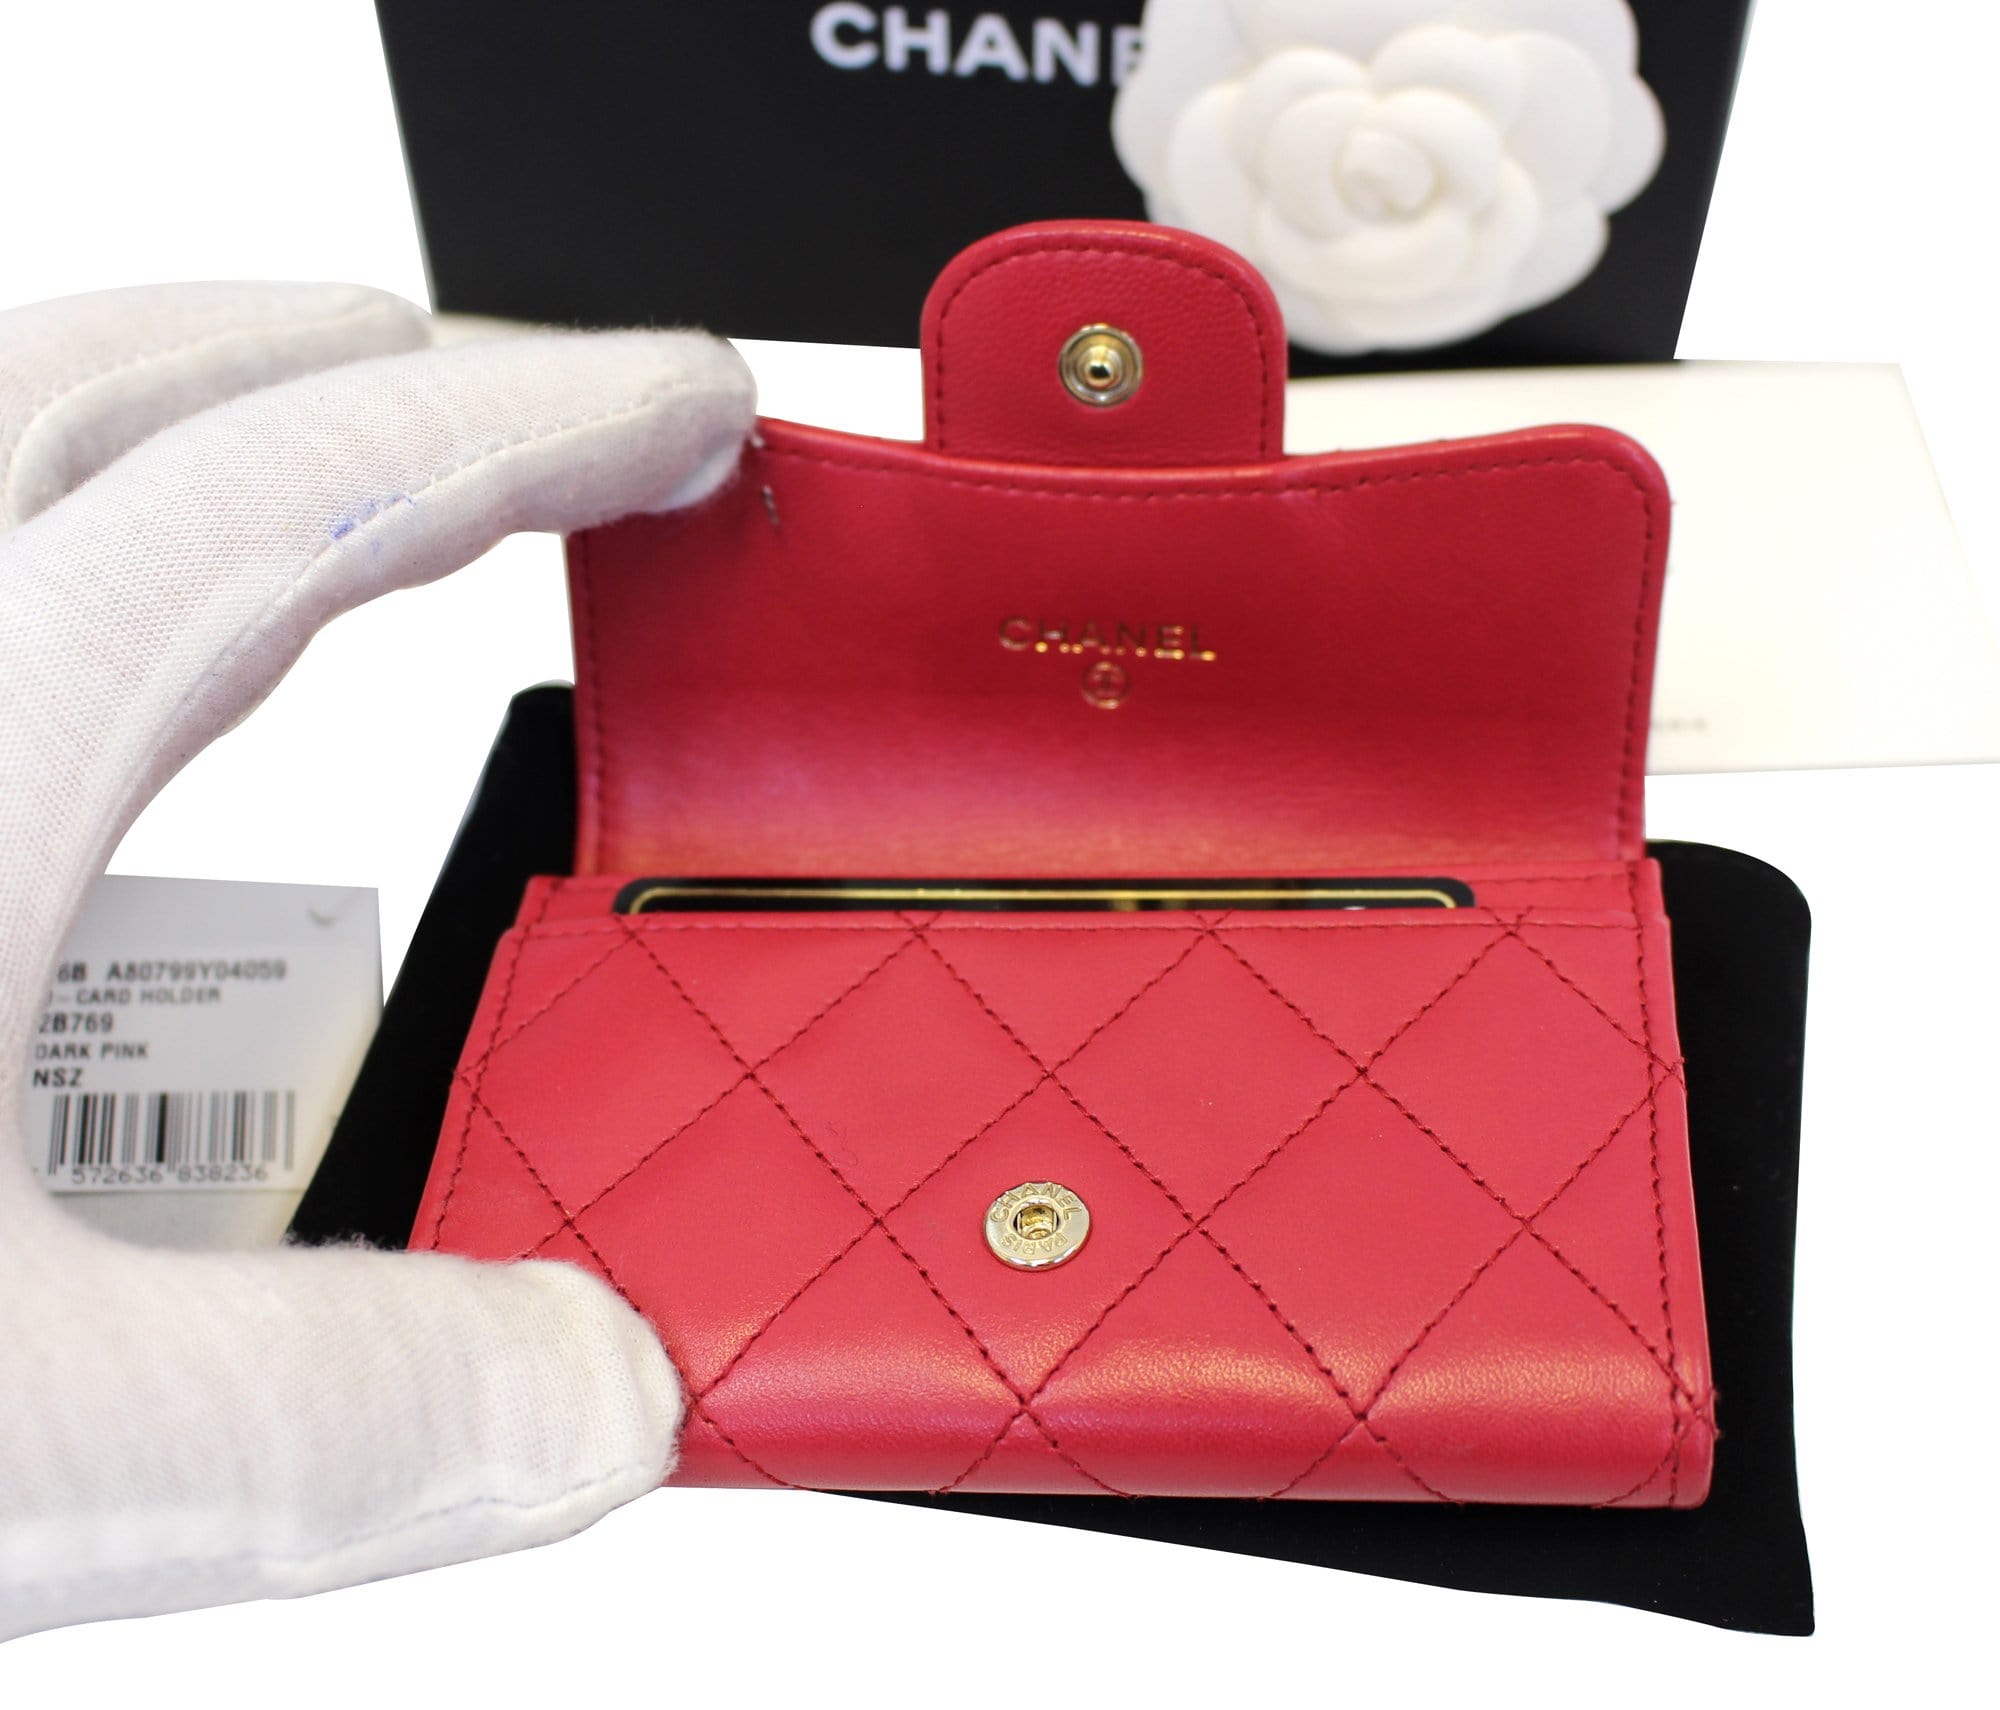 CHANEL, Bags, Chanel Bright Tangerine Orange Lucky Charms Wallet Purse  With The Box And Tags